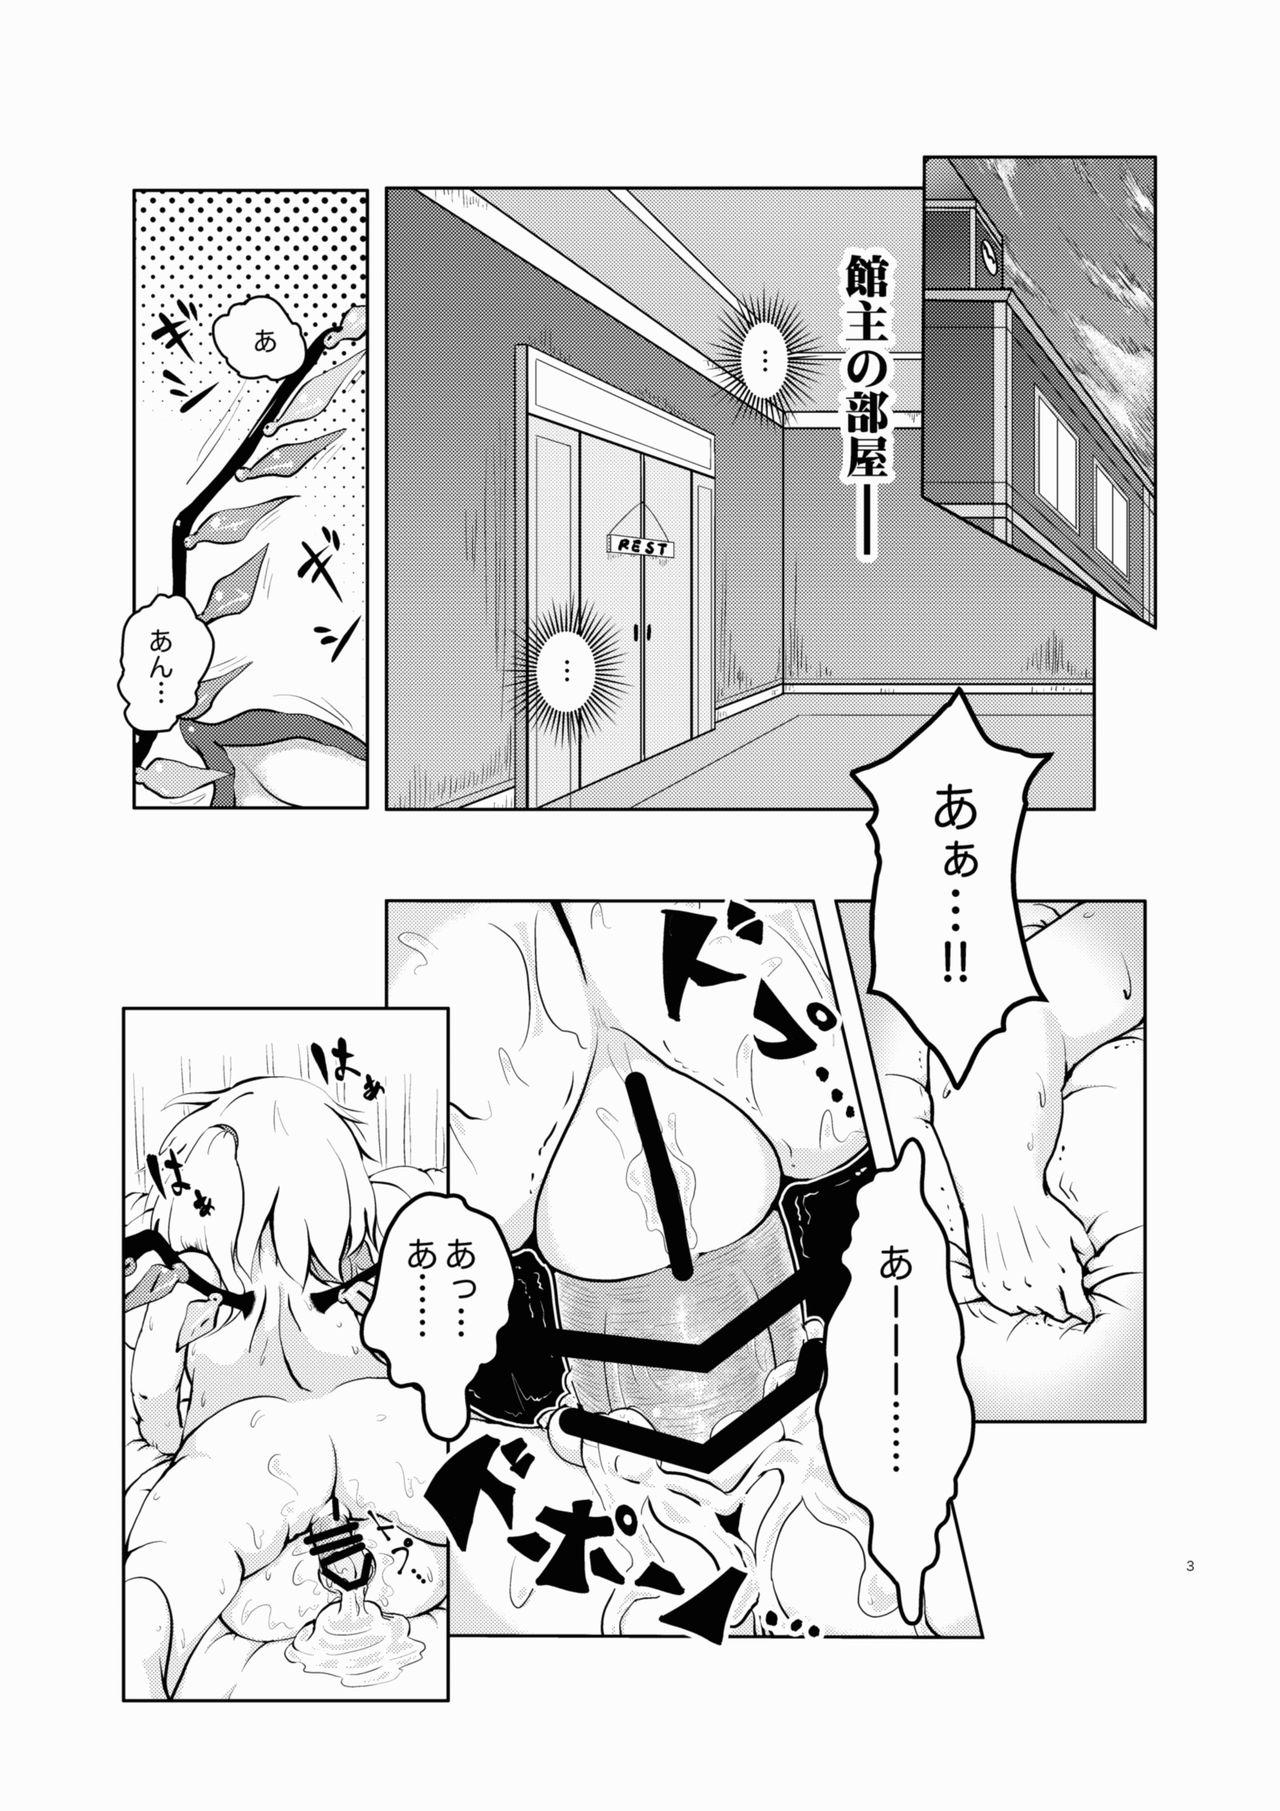 Chileno Scarlet Conflict 1 - Touhou project Bedroom - Page 3